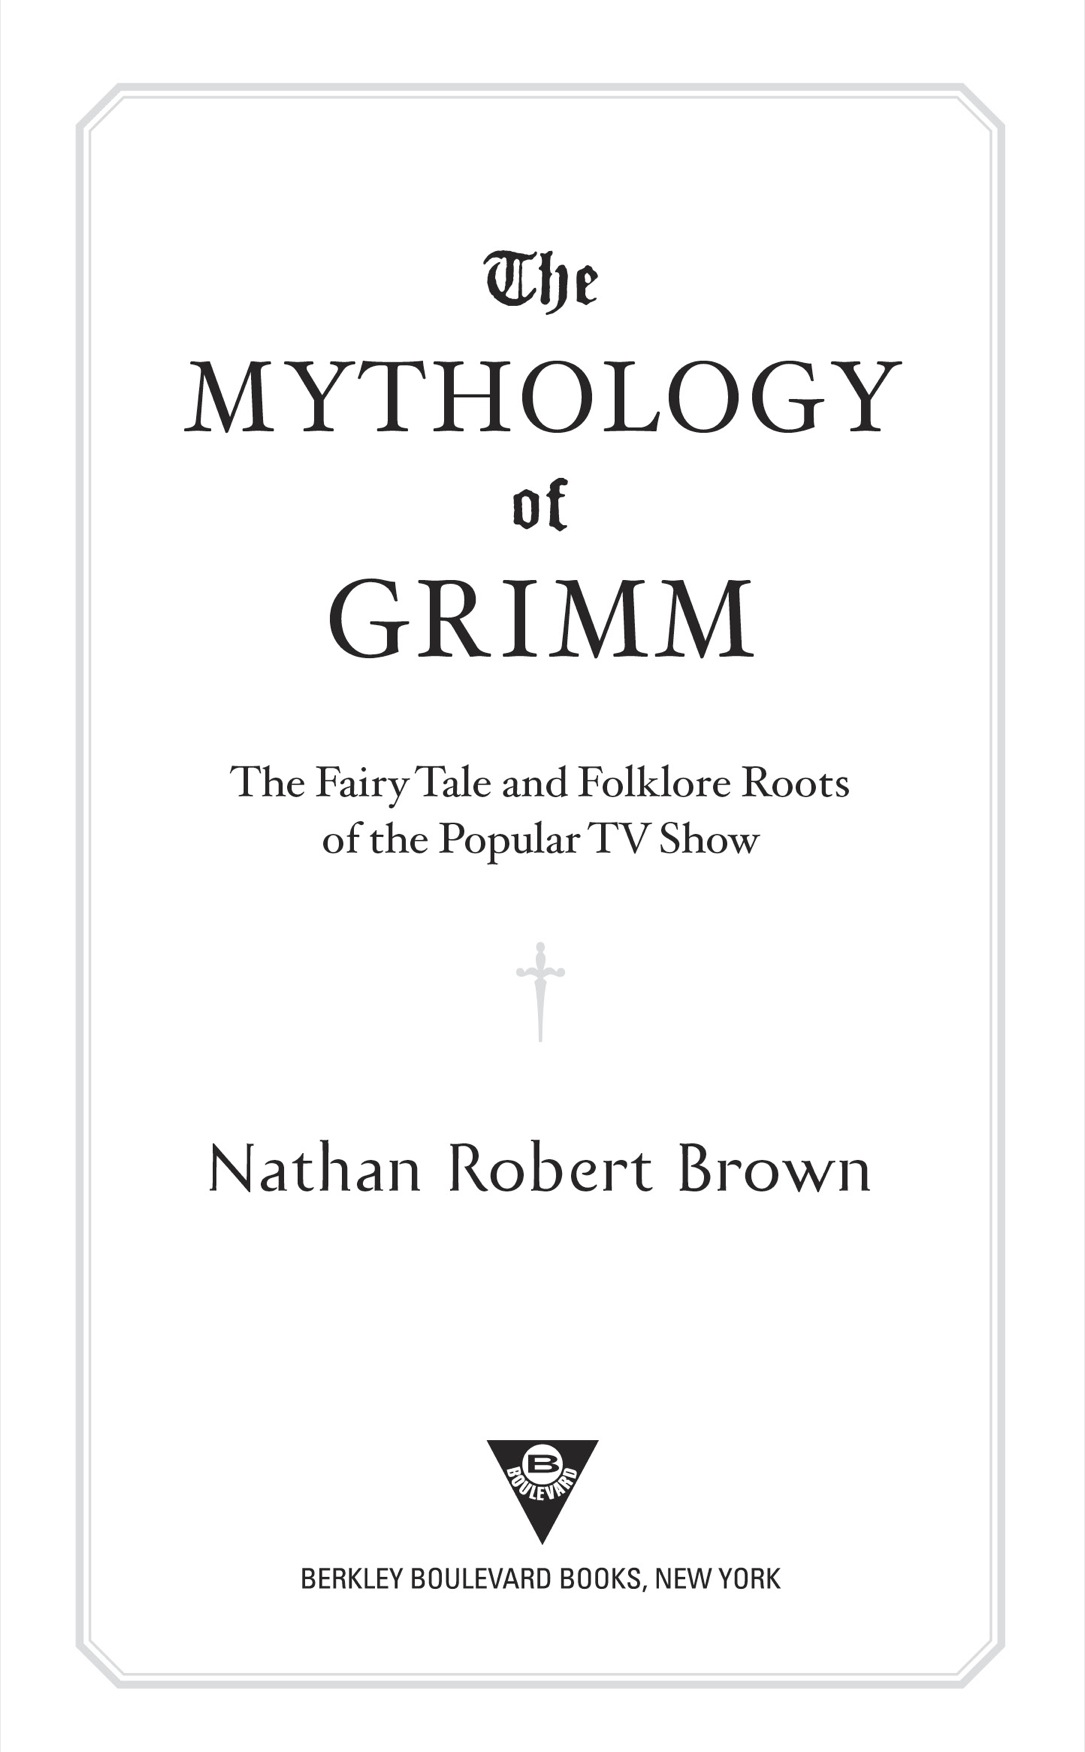 The Mythology of Grimm The Fairy Tale and Folklore Roots of the Popular TV Show - image 2